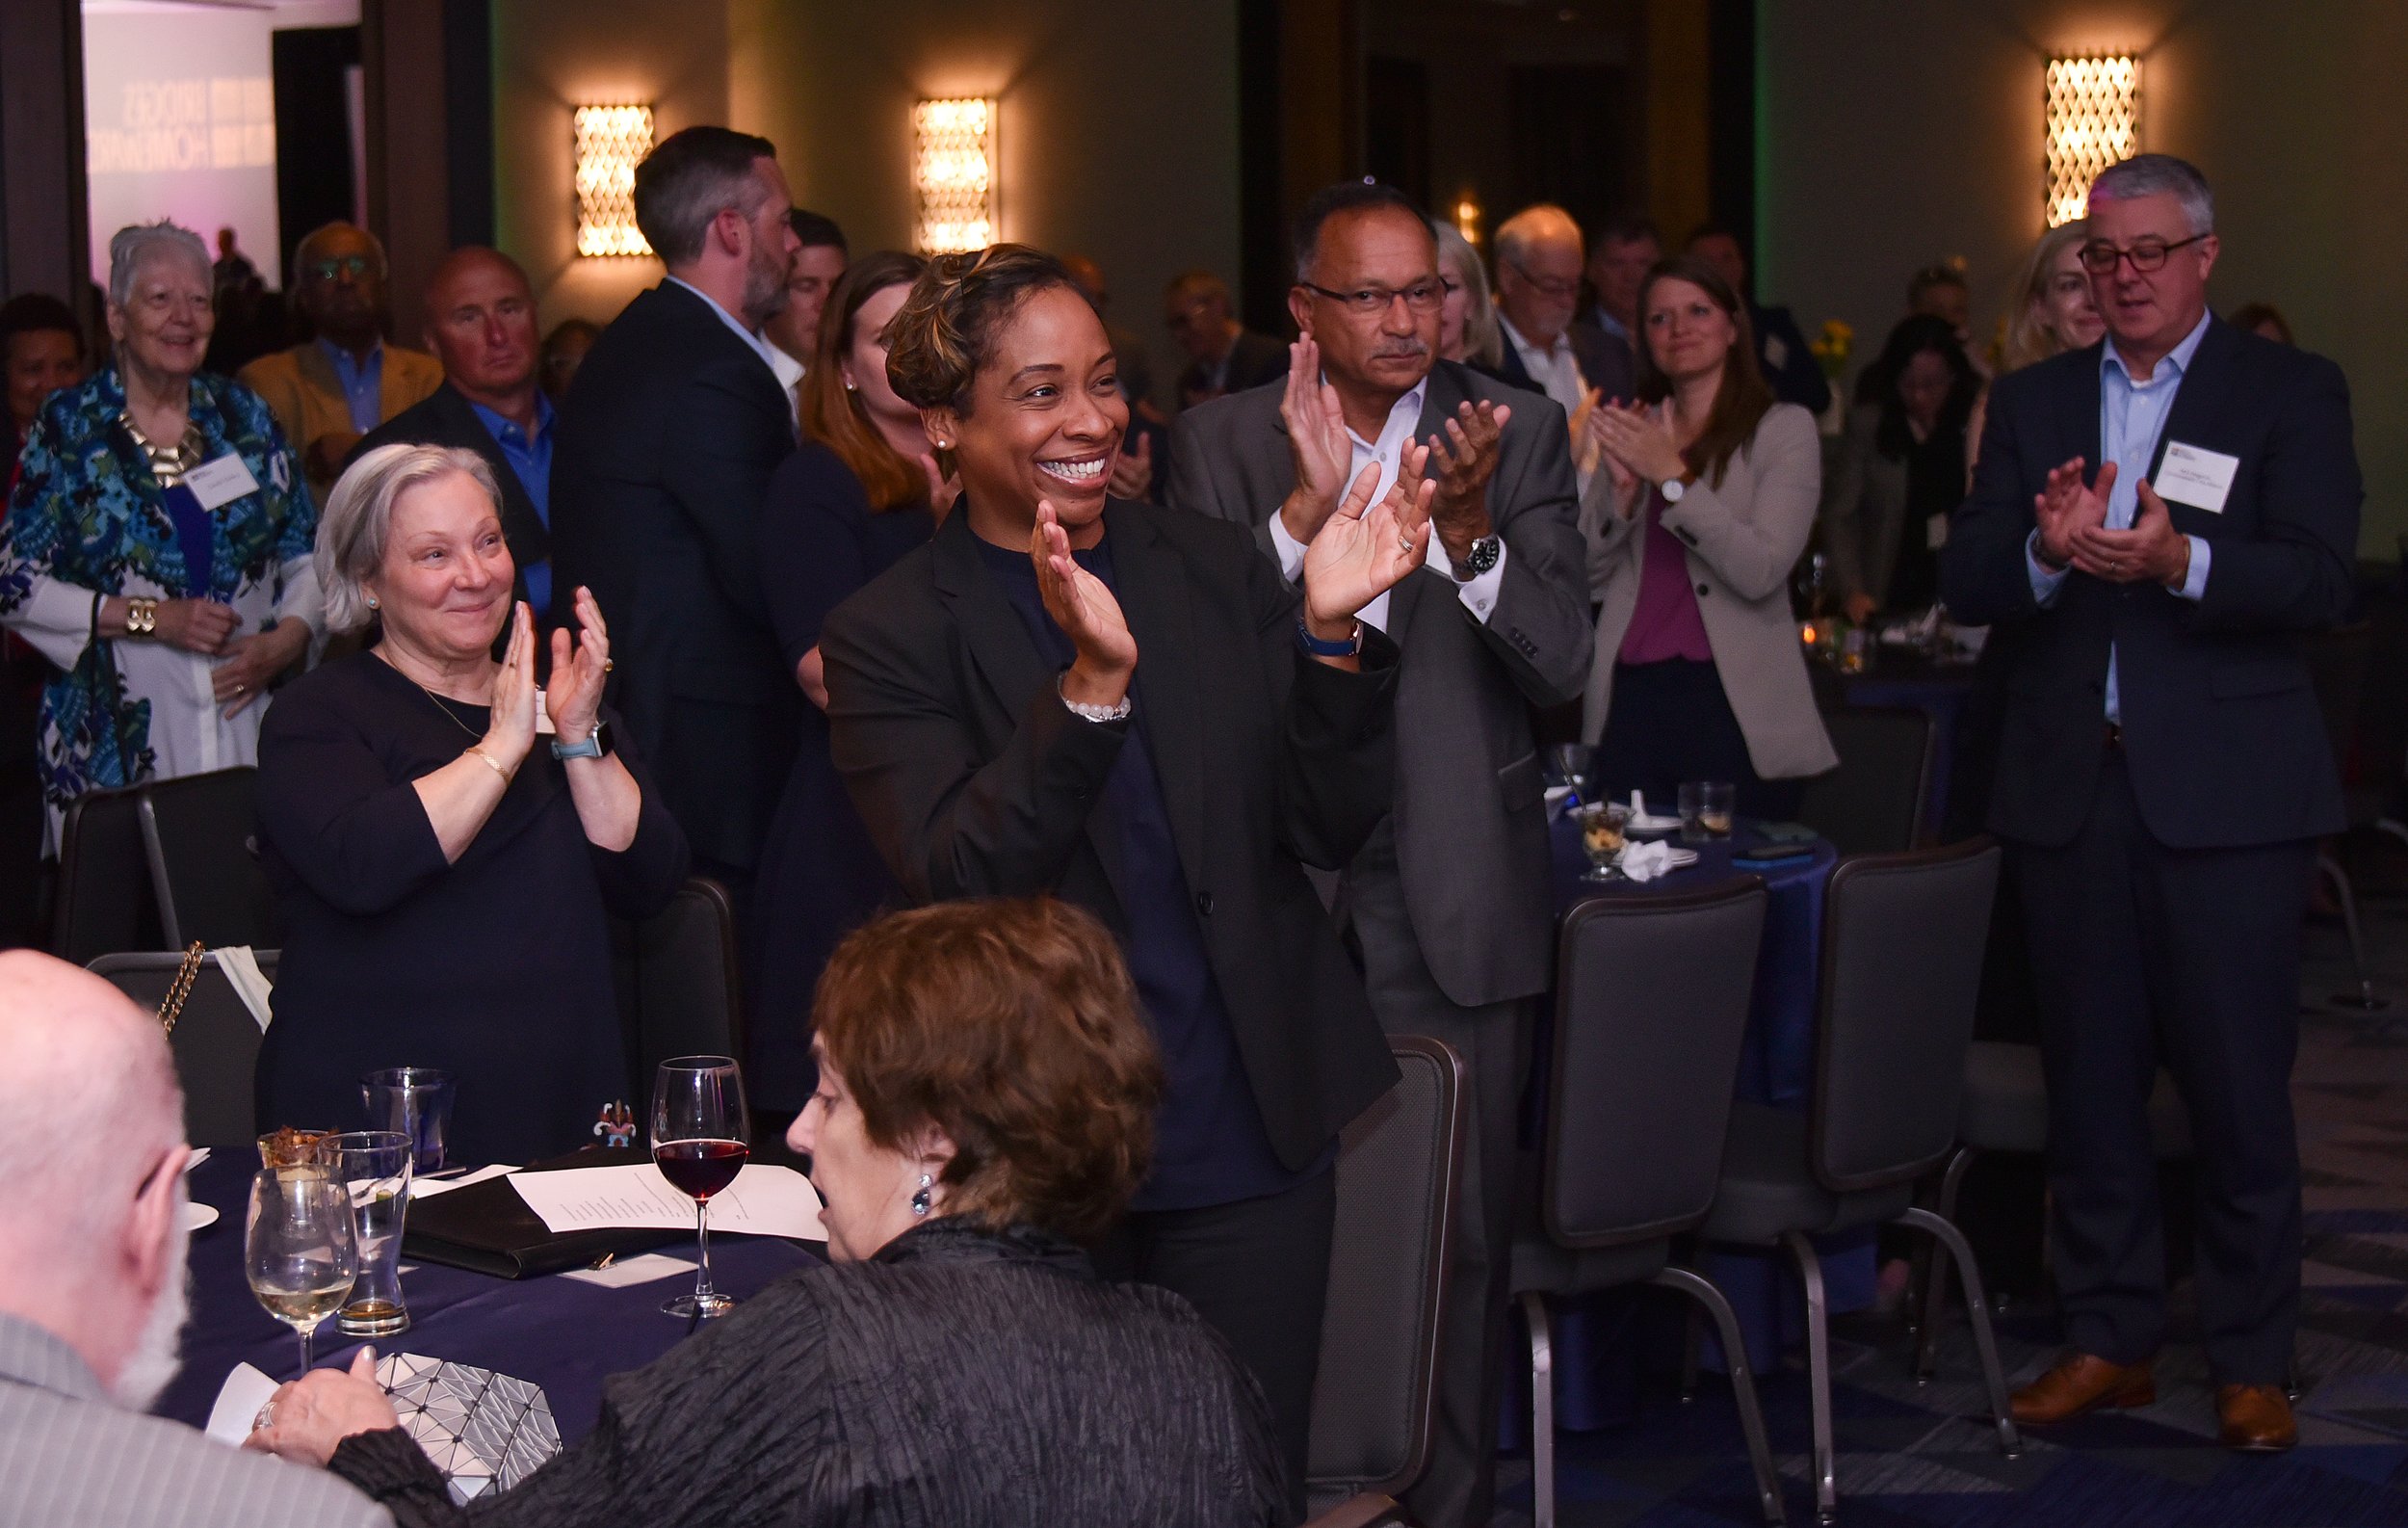 Massachusetts Child Advocate Maria Mossaides, Attorney General Andrea Campbell, and others stand and applaud Bob Gittens.